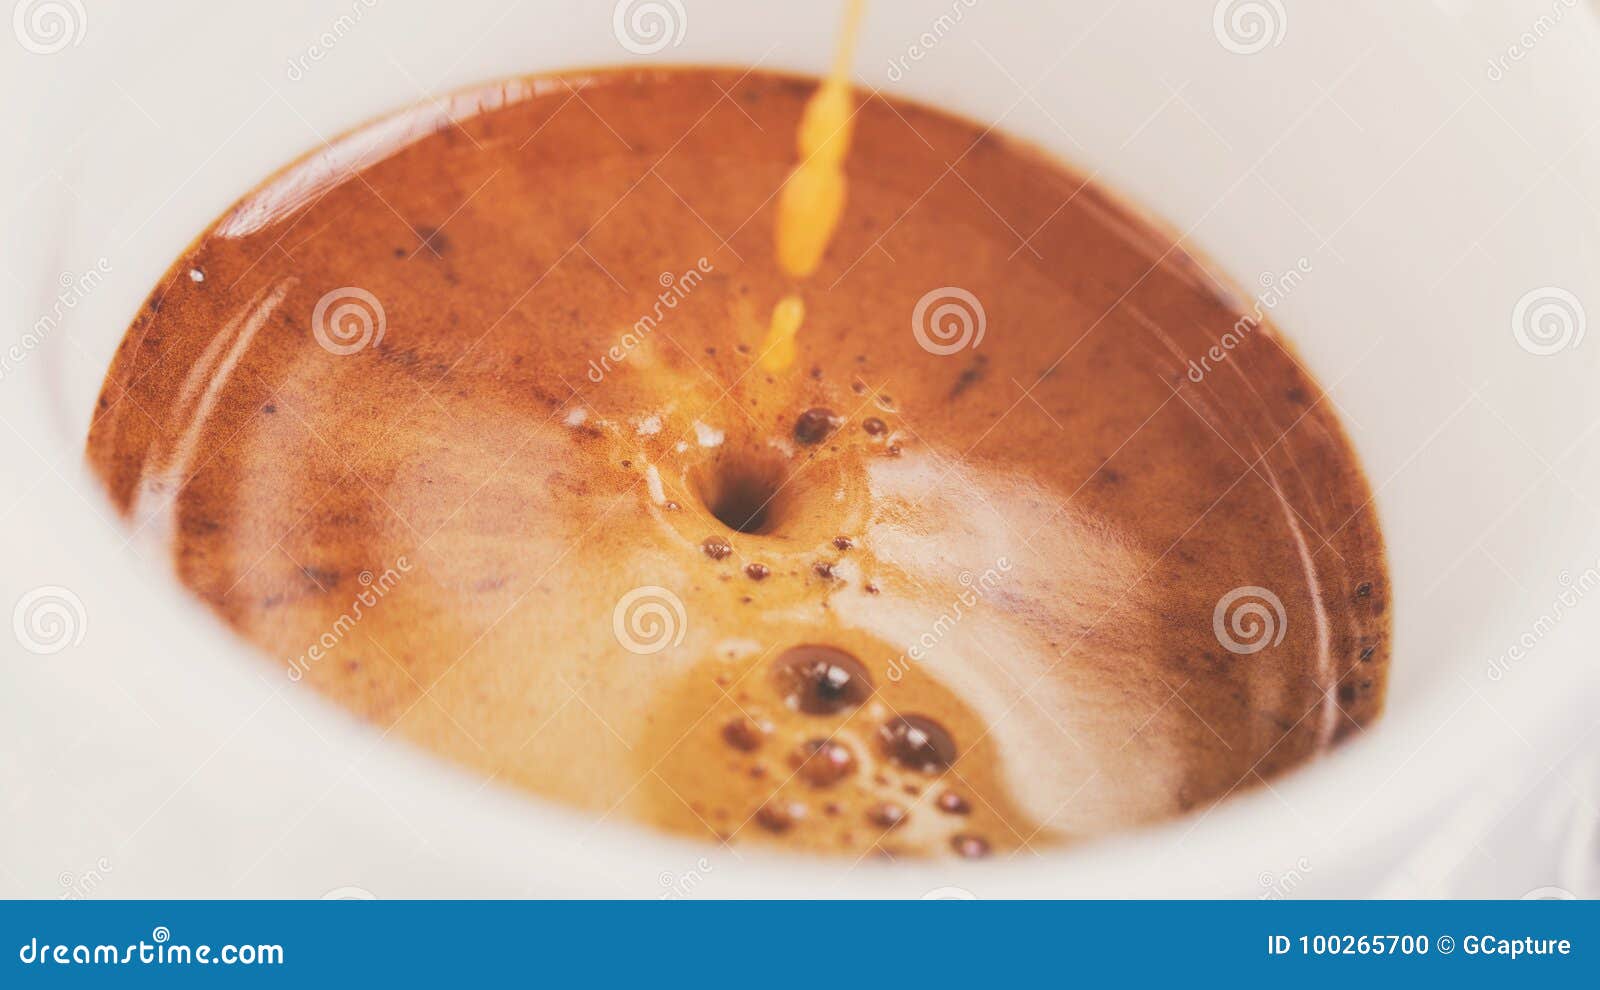 extraction of espresso with rich crema in cup